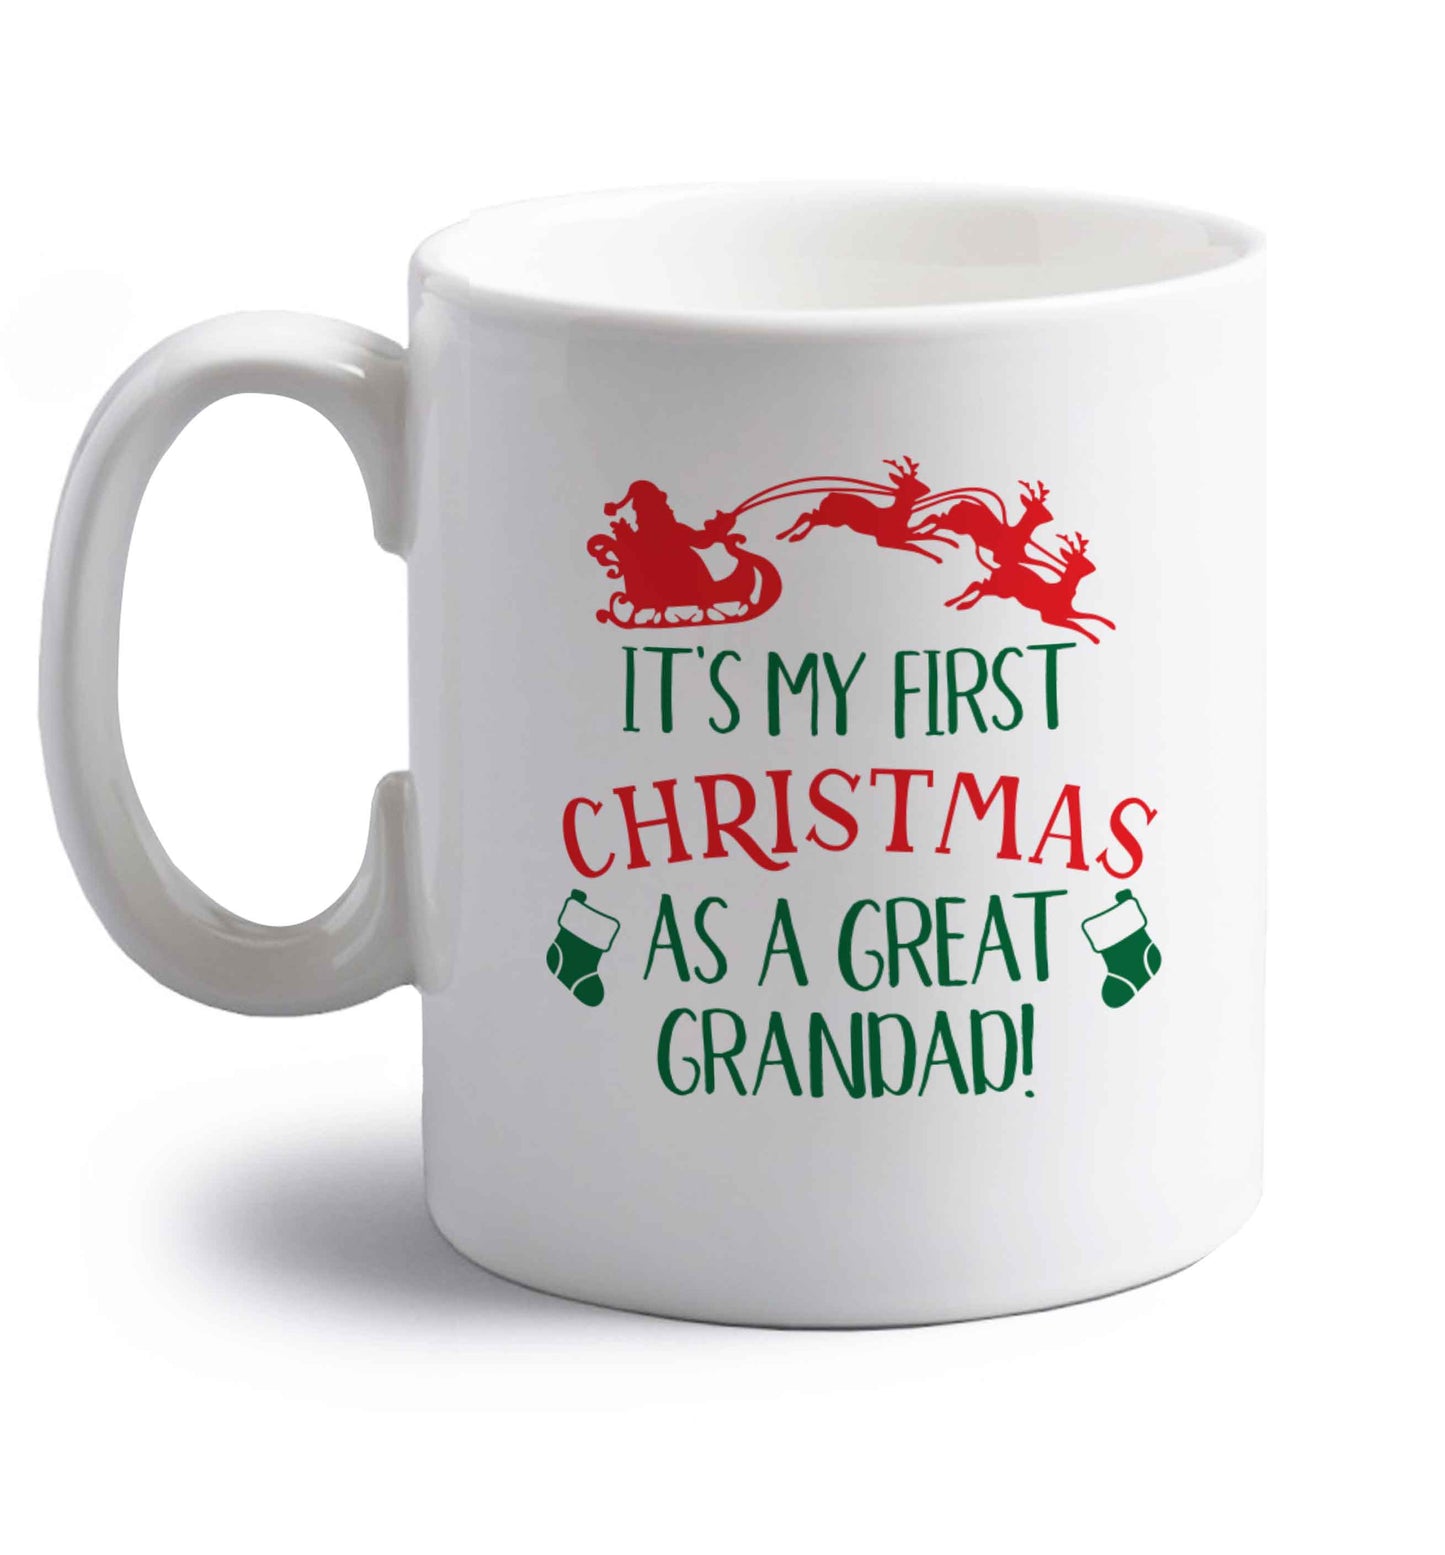 It's my first Christmas as a great grandad! right handed white ceramic mug 